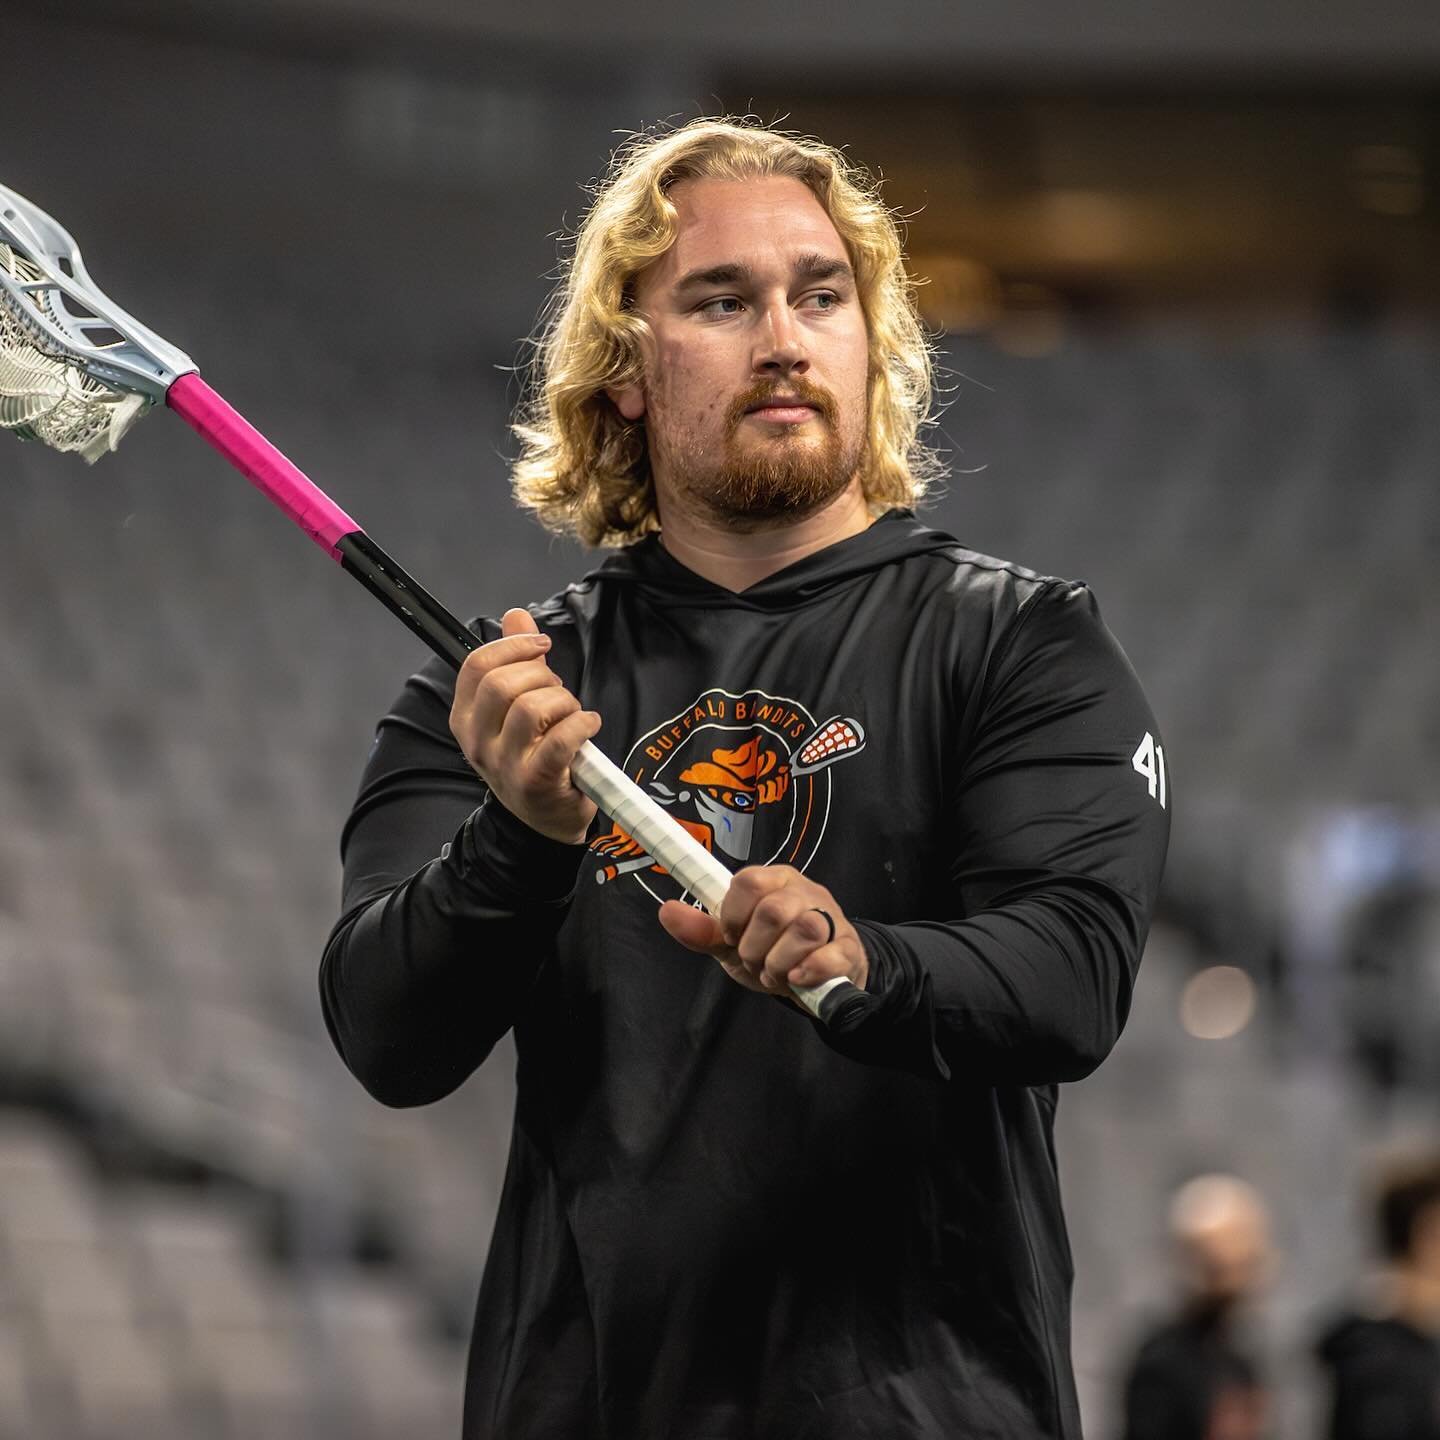 The Buffalo Bandits before signing Connor Farrell on March 6&hellip;
&nbsp;
Faceoffs: 96/324 (0.296)
Record: 5-6 (0.455)
&nbsp;
The Bandits after signing Farrell&hellip;
&nbsp;
Faceoffs: 111/198 (0.561)
Record: 6-1 (0.857)
&nbsp;
Hit the link in our 